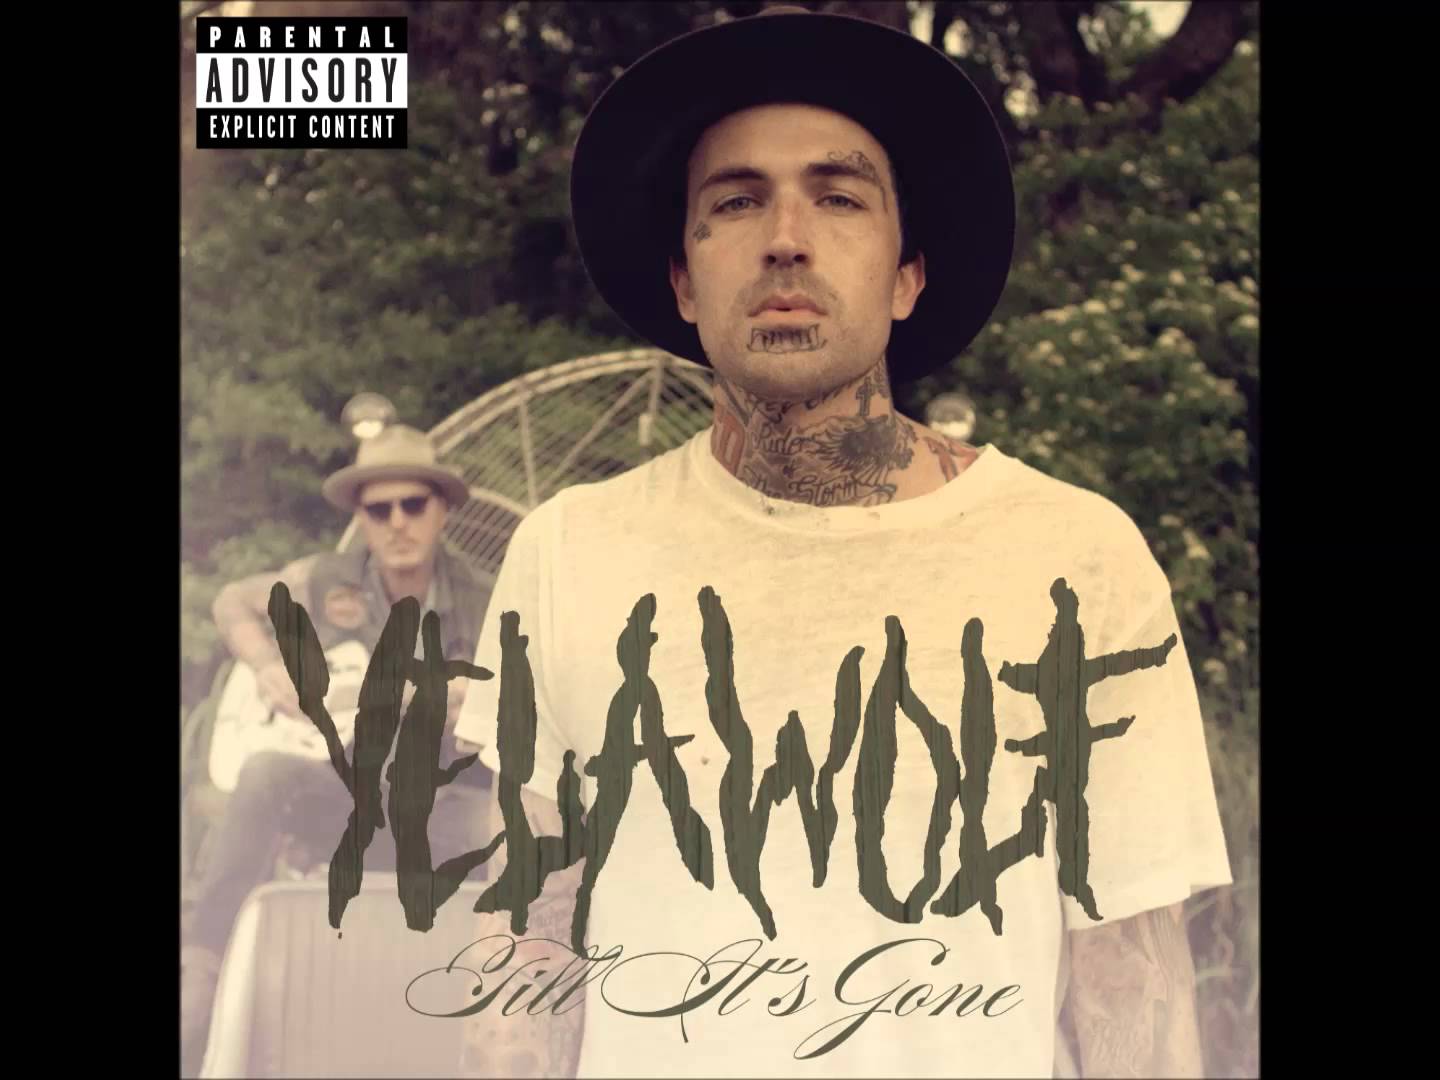 pop the trunk yelawolf mp3 download